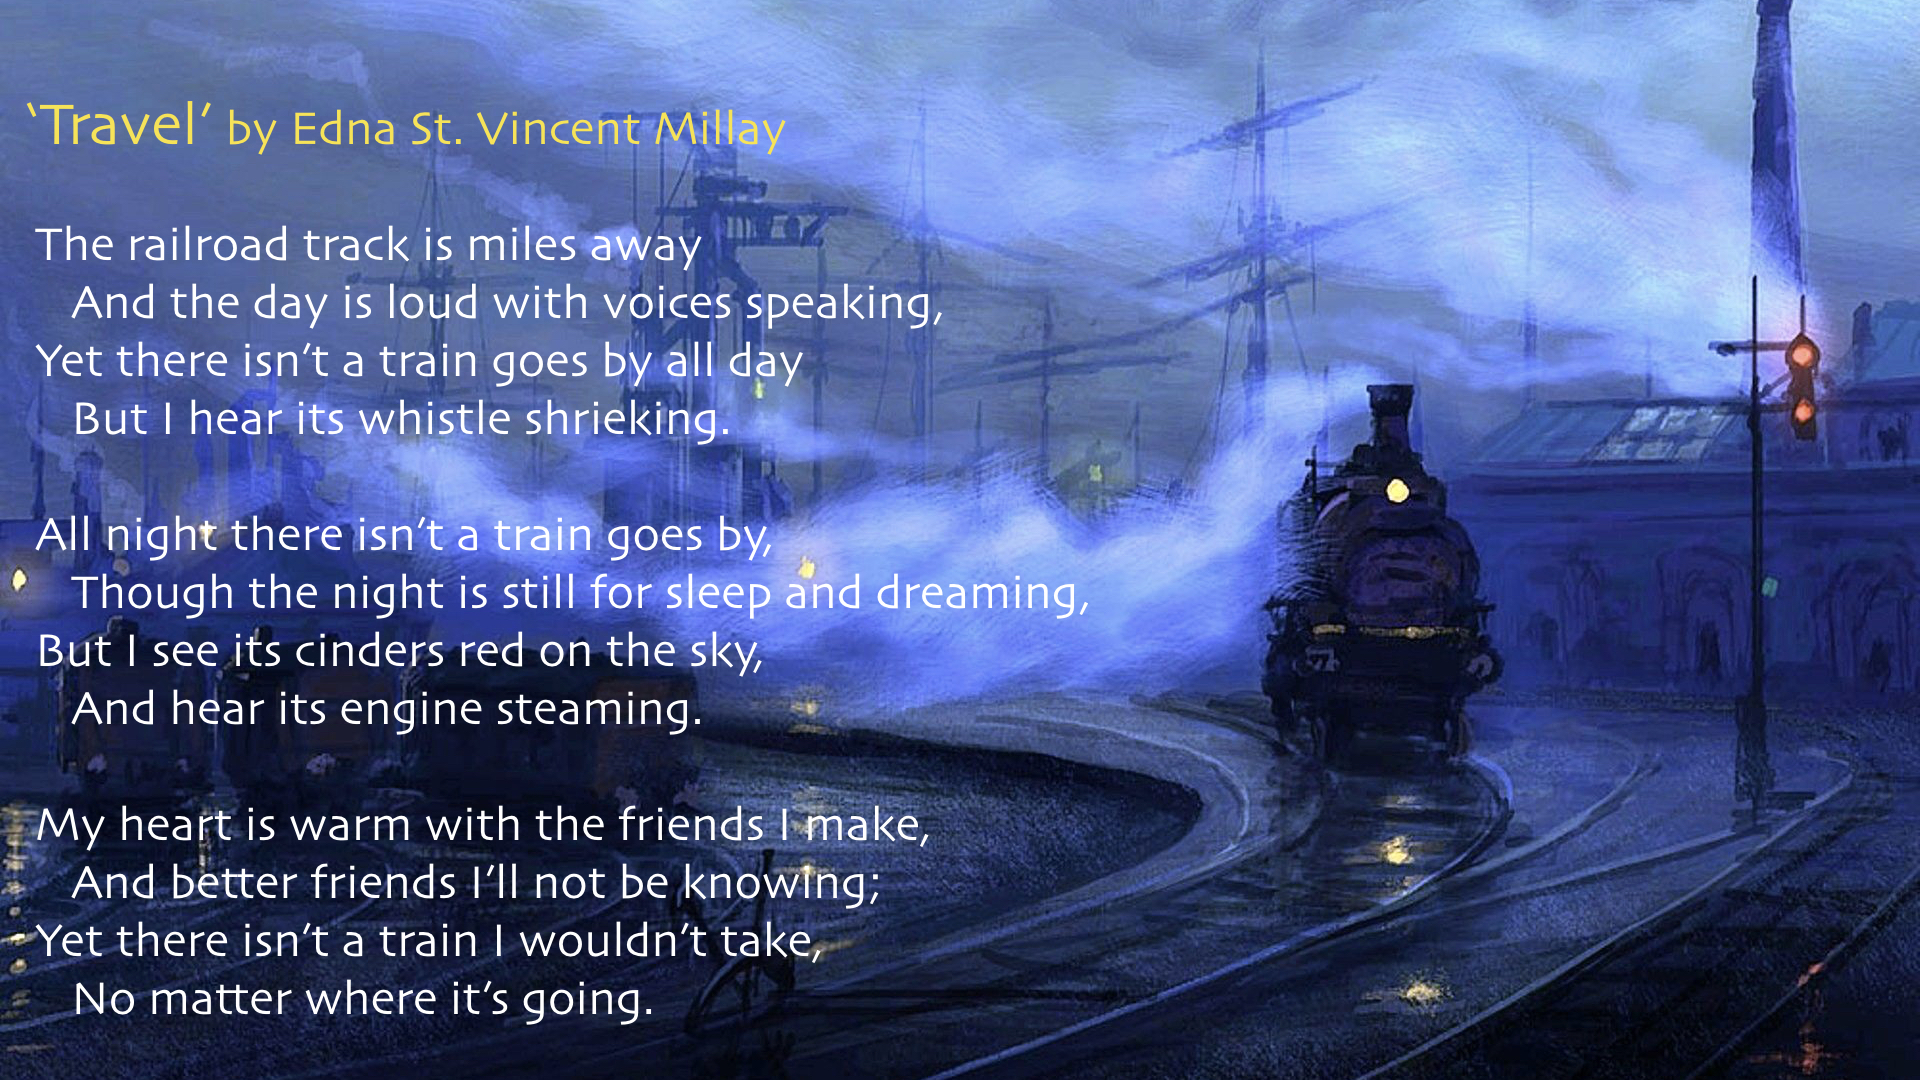 travel by edna st. vincent millay